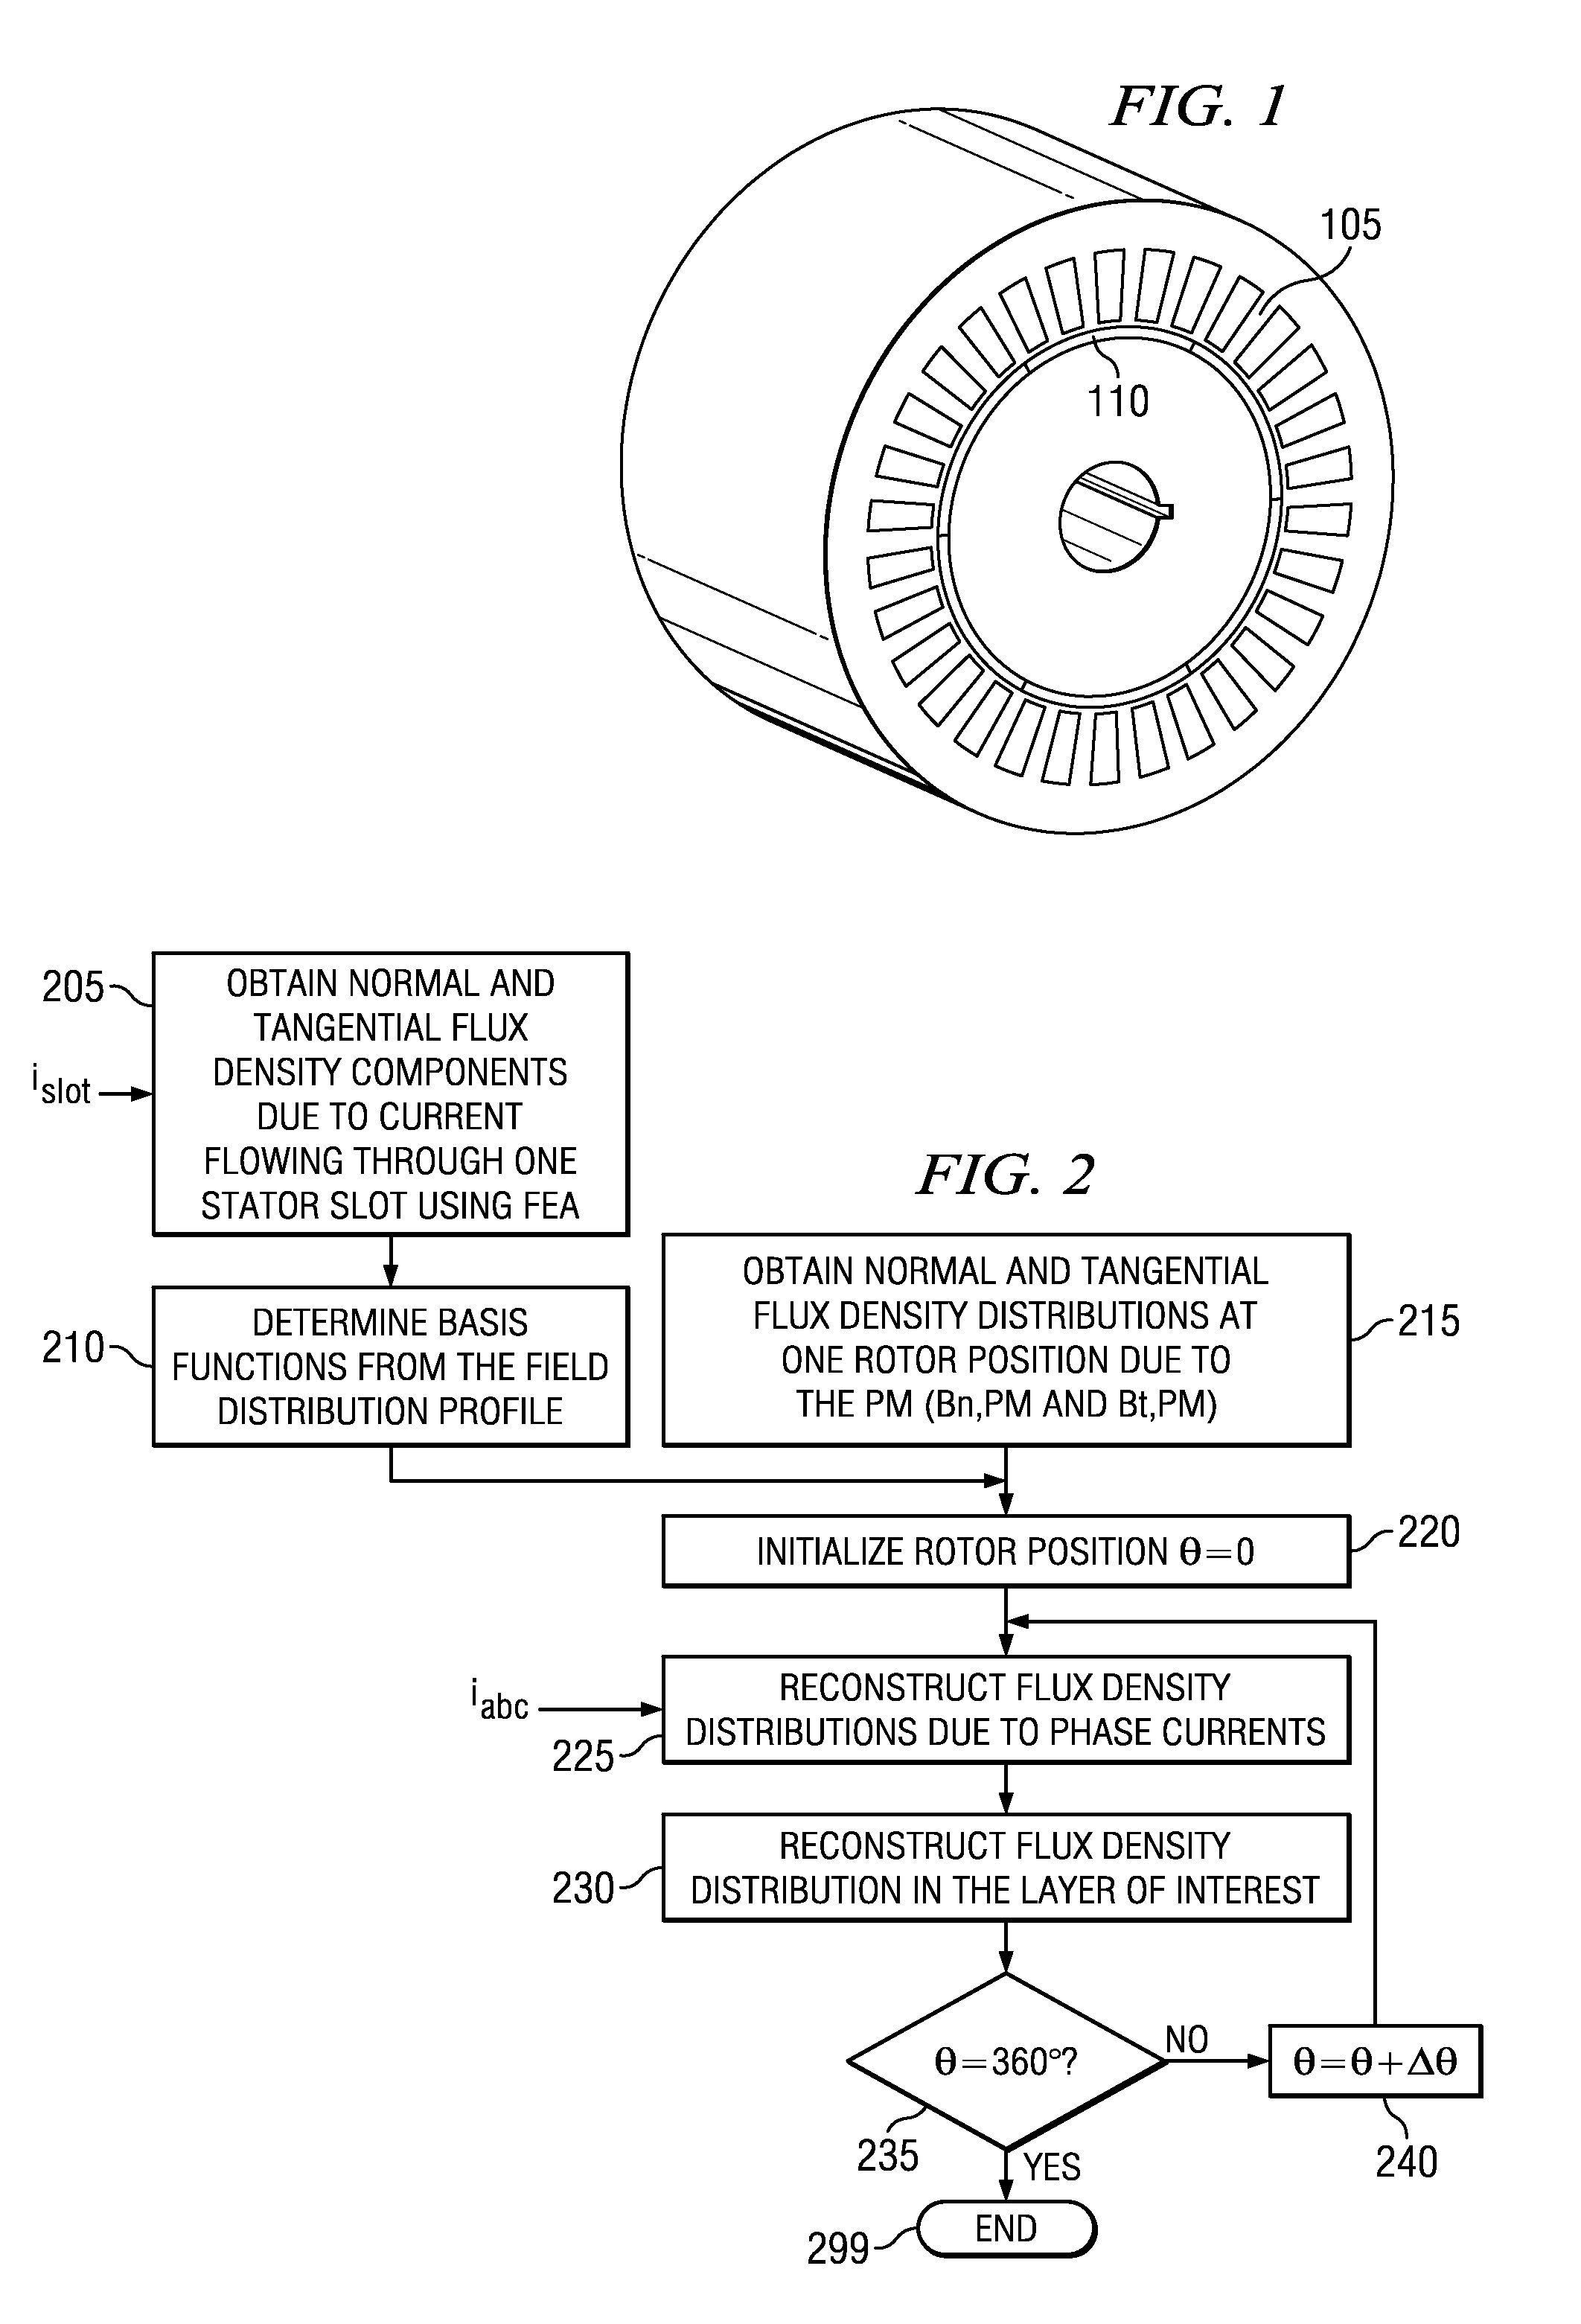 Methods and apparatuses for fault management in permanent magnet synchronous machines using the field reconstruction method